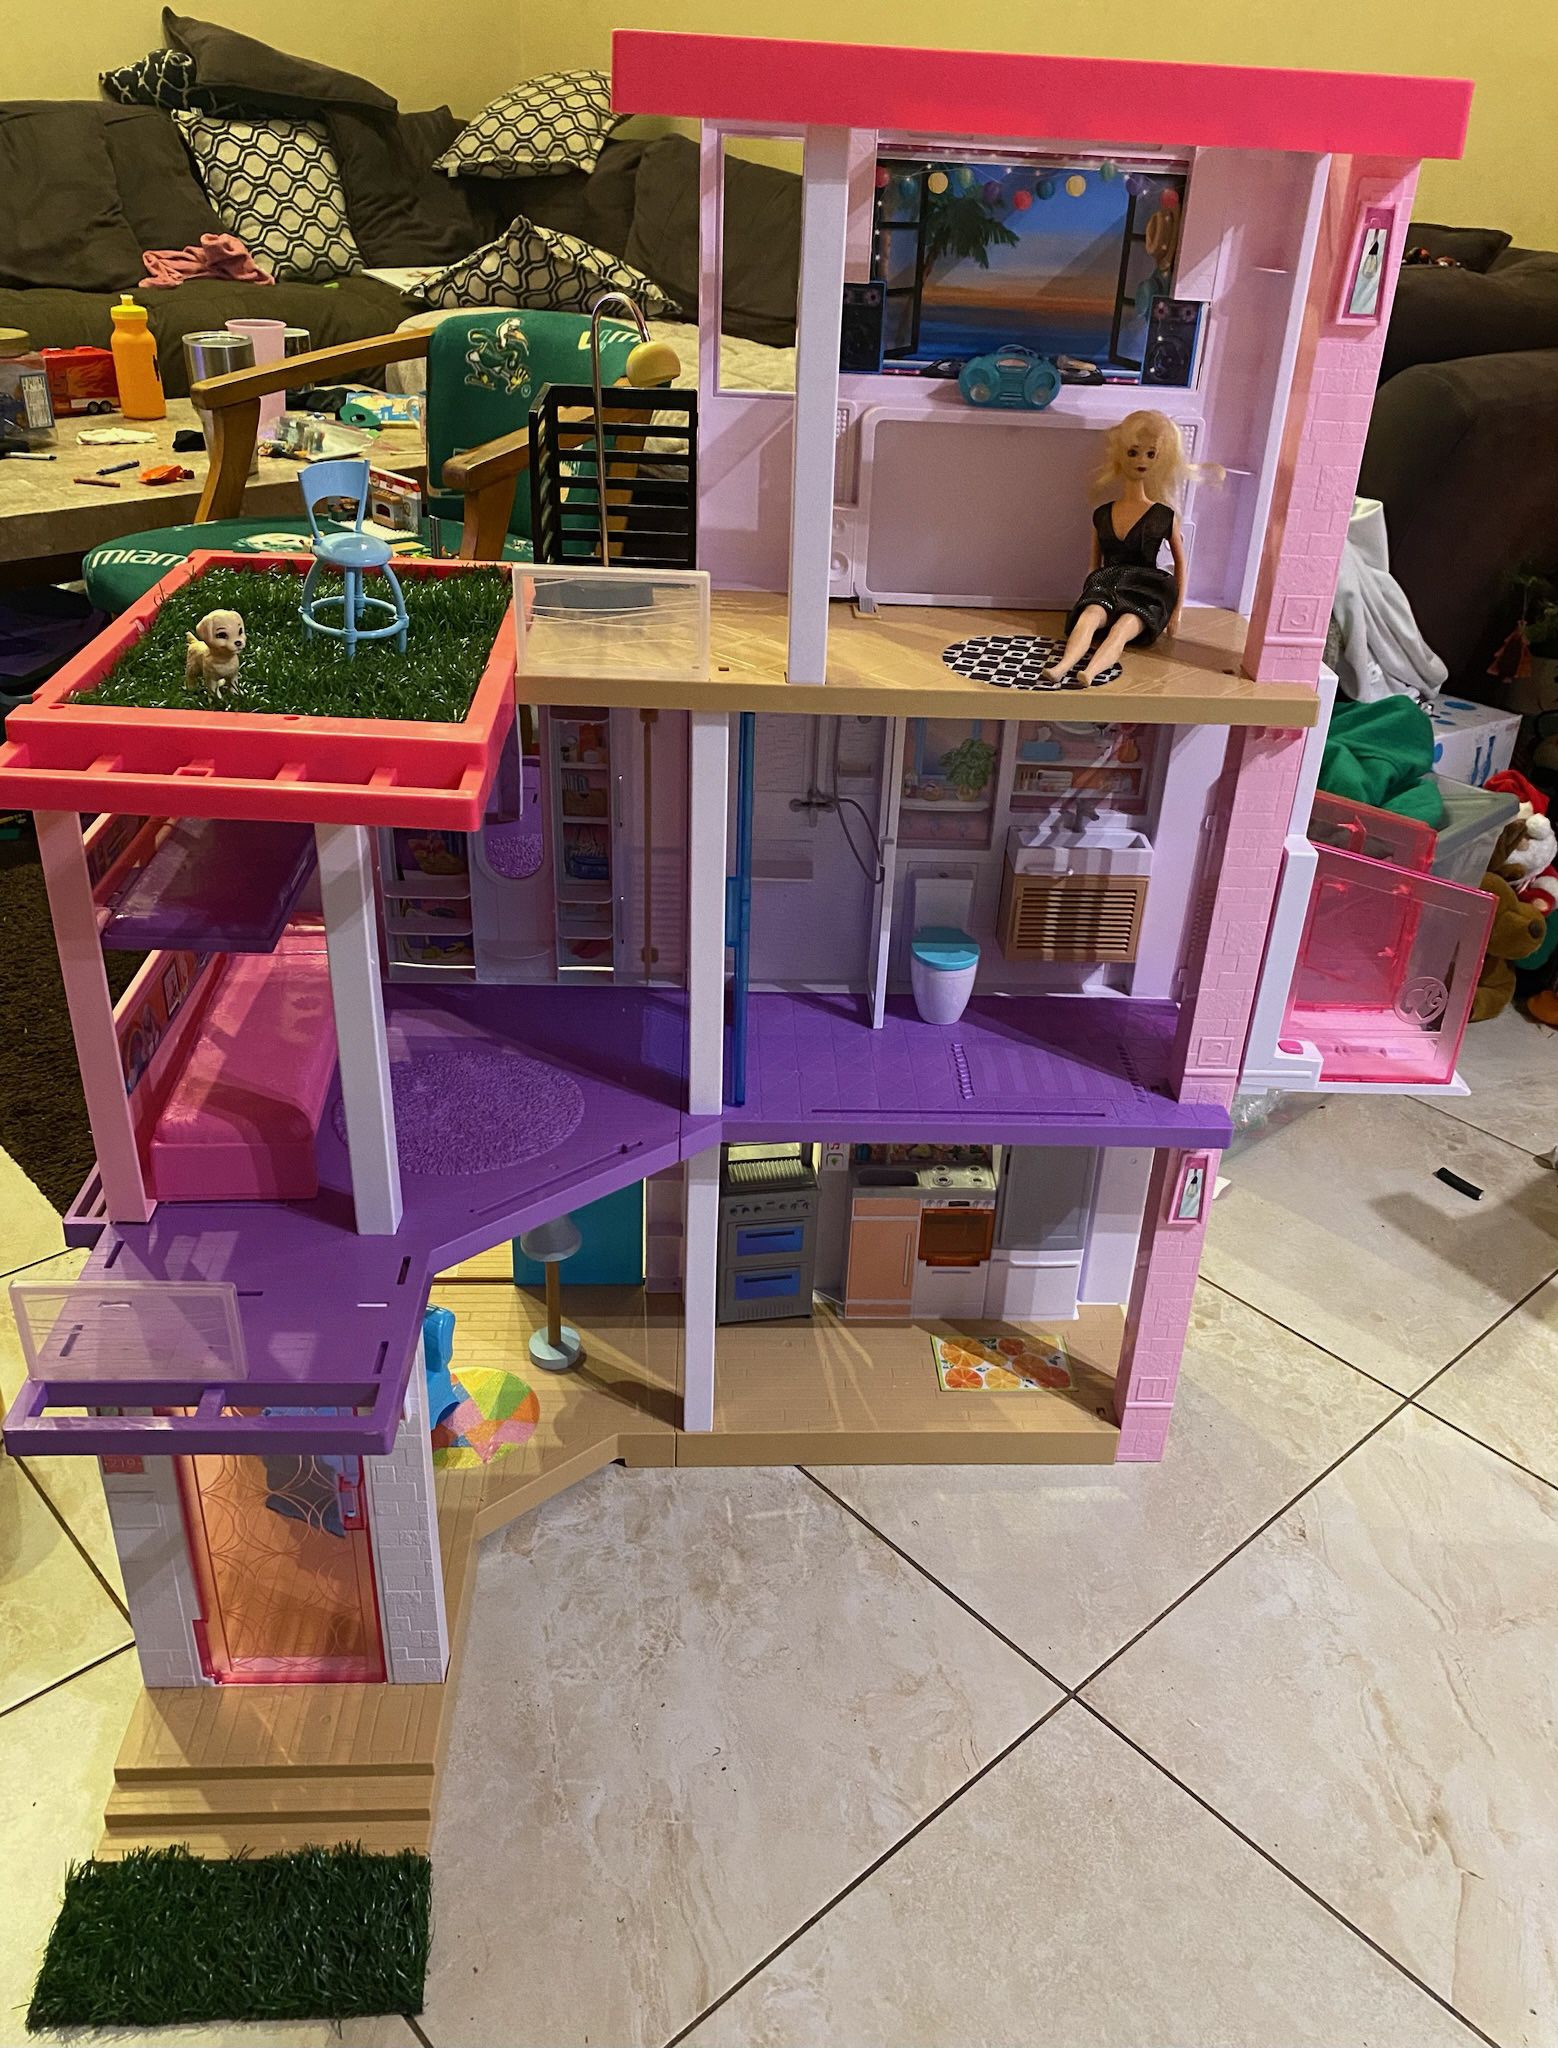 Three Story Barbie Dream House with lights & sounds Doll & Accessories - Local delivery for a fee 😀